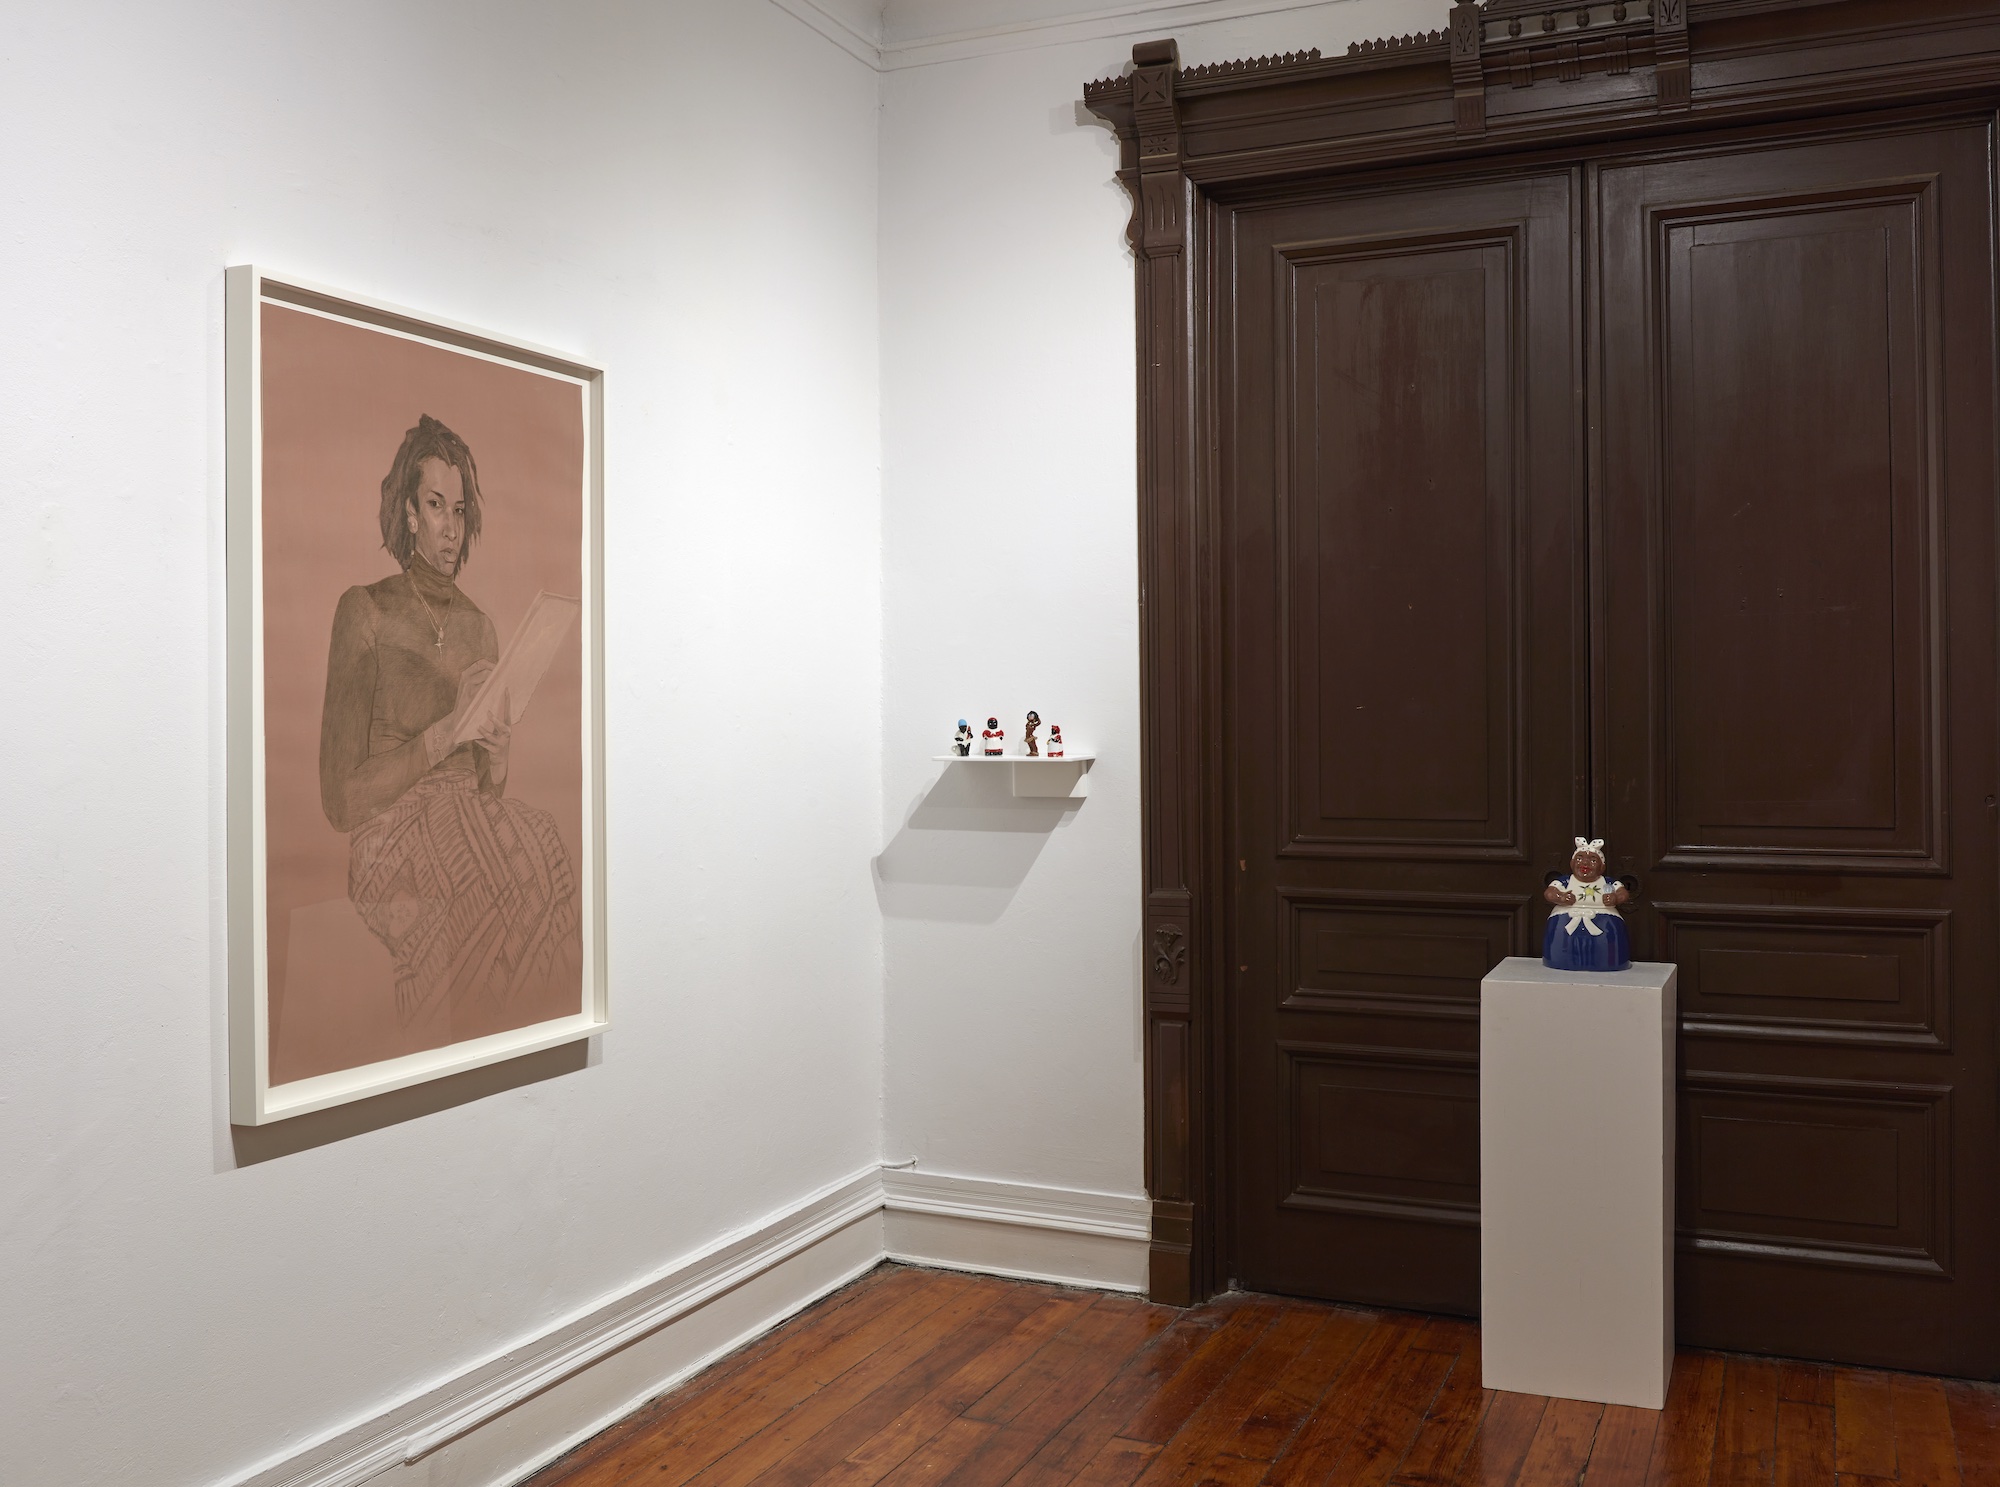 Image of a women sitting down with a book in her hand and sculptures sitting to the right of her in front of a brown door